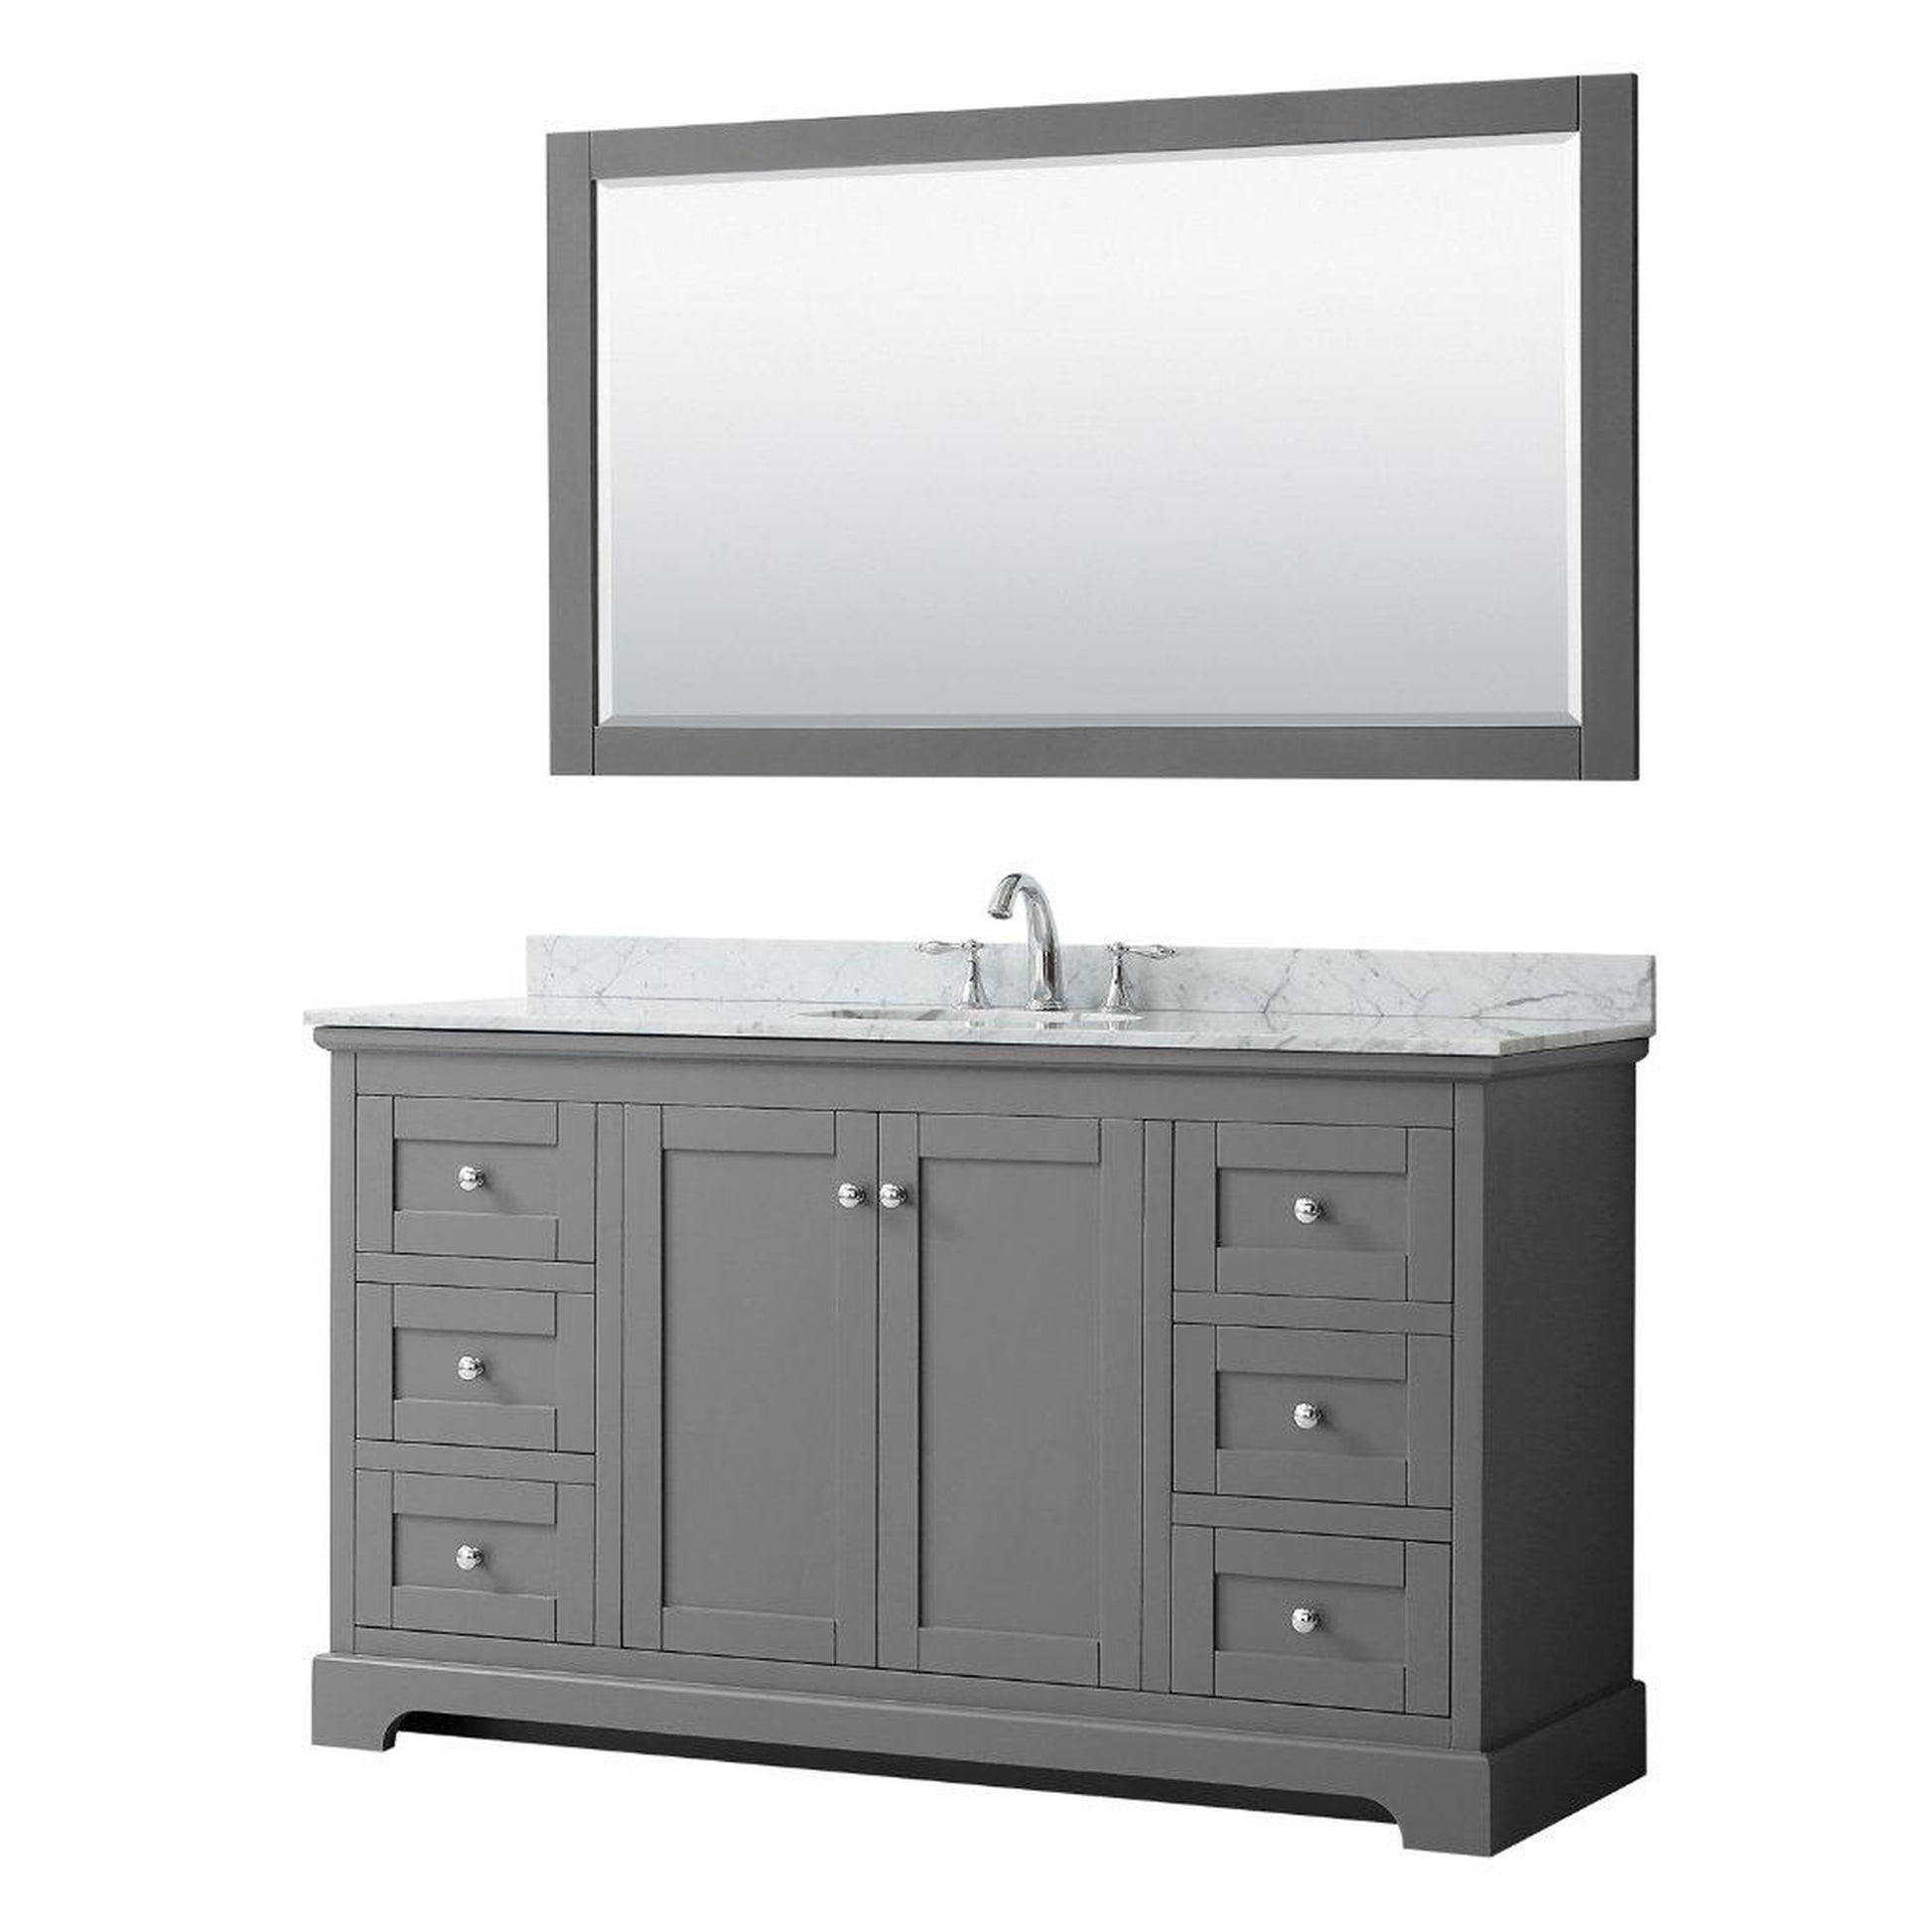 Wyndham Collection Avery 60" Dark Gray Single Bathroom Vanity Set With White Carrara Marble Countertop With 3-Hole Faucet And 8" Oval Sink And 58" Mirror